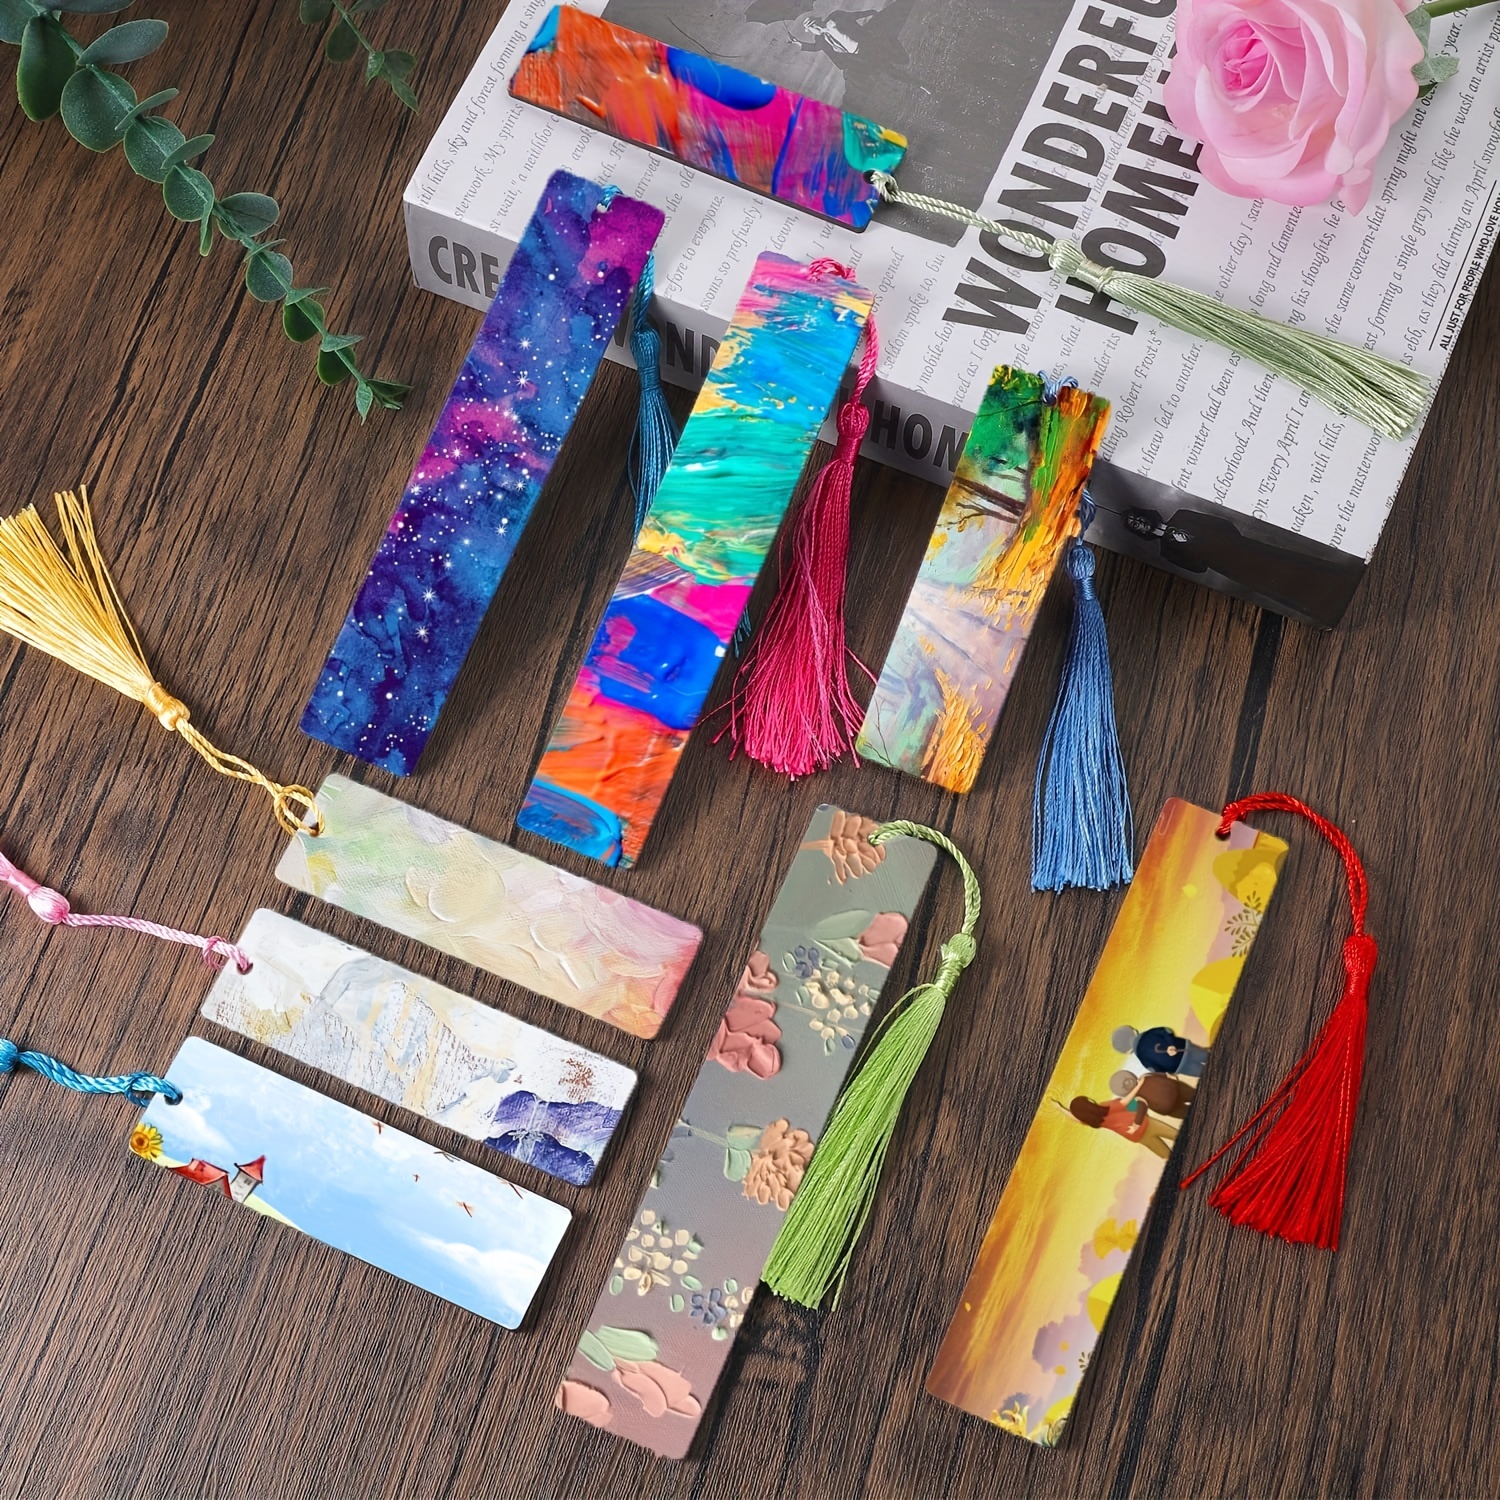 35 Pieces Sublimation Blank Bookmark, Heat Transfer Sublimation Bookmarks with Hole and 35 Pcs Colorful Tassels, Men's, Size: Small, Other